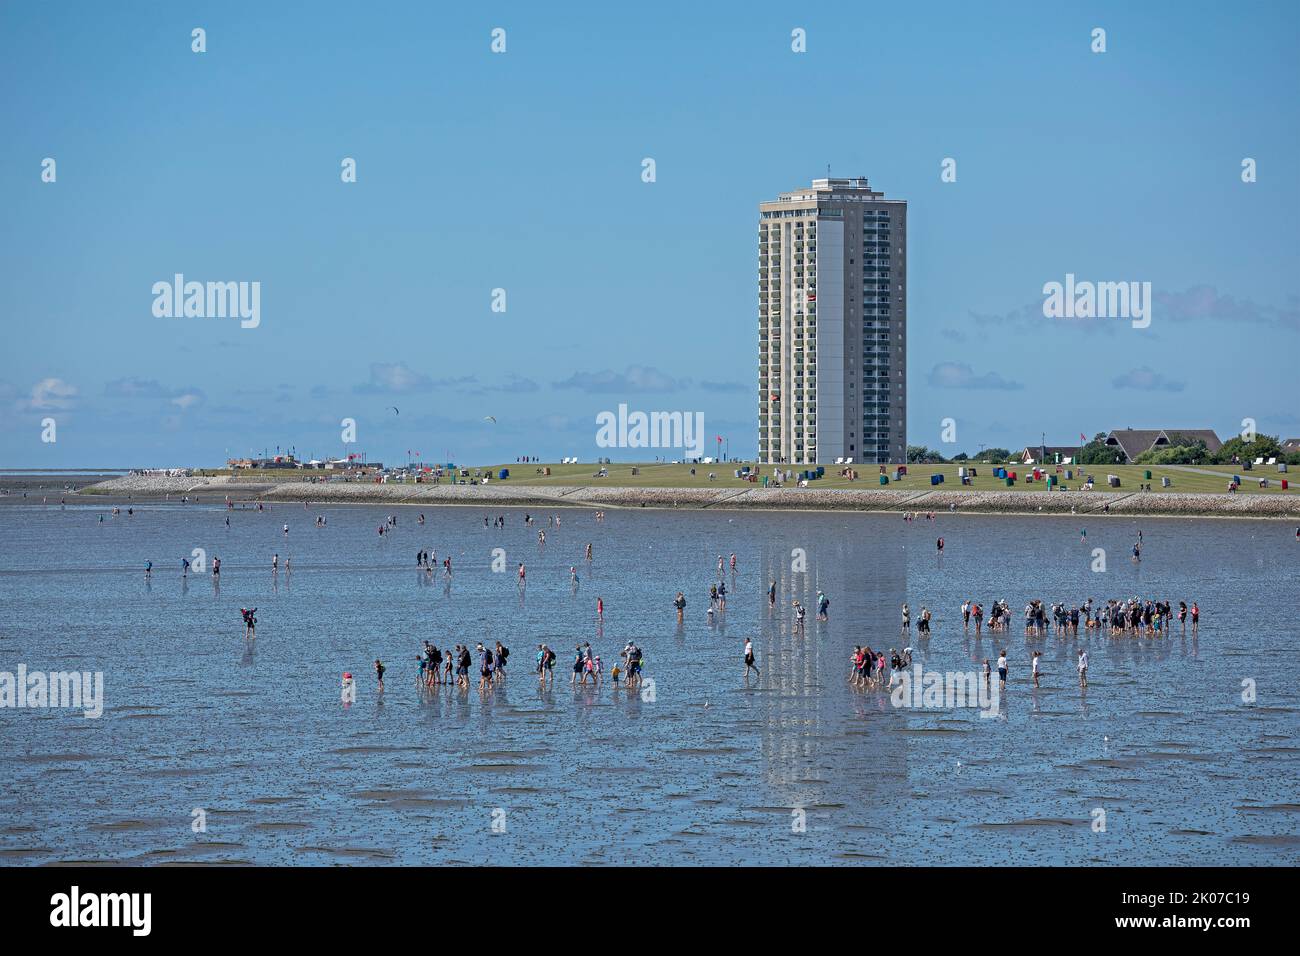 people on the intertidal mudflats, high-rise building, Büsum, Schleswig-Holstein, Germany Stock Photo